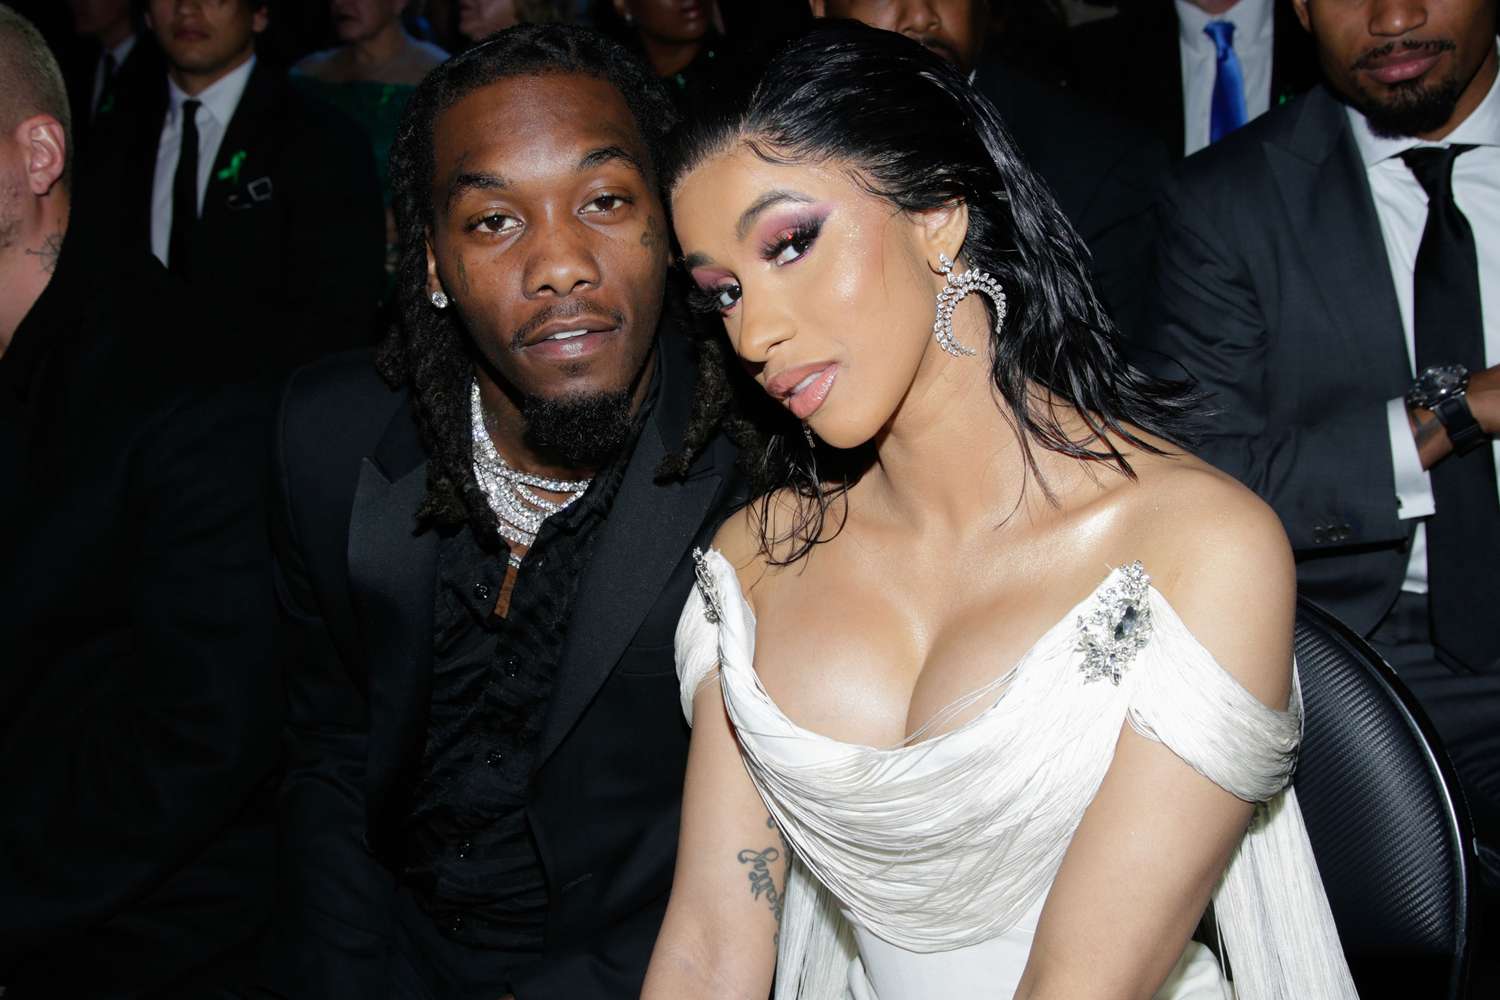 Cardi B And Offset Spotted Together In NYC Despite Breakup